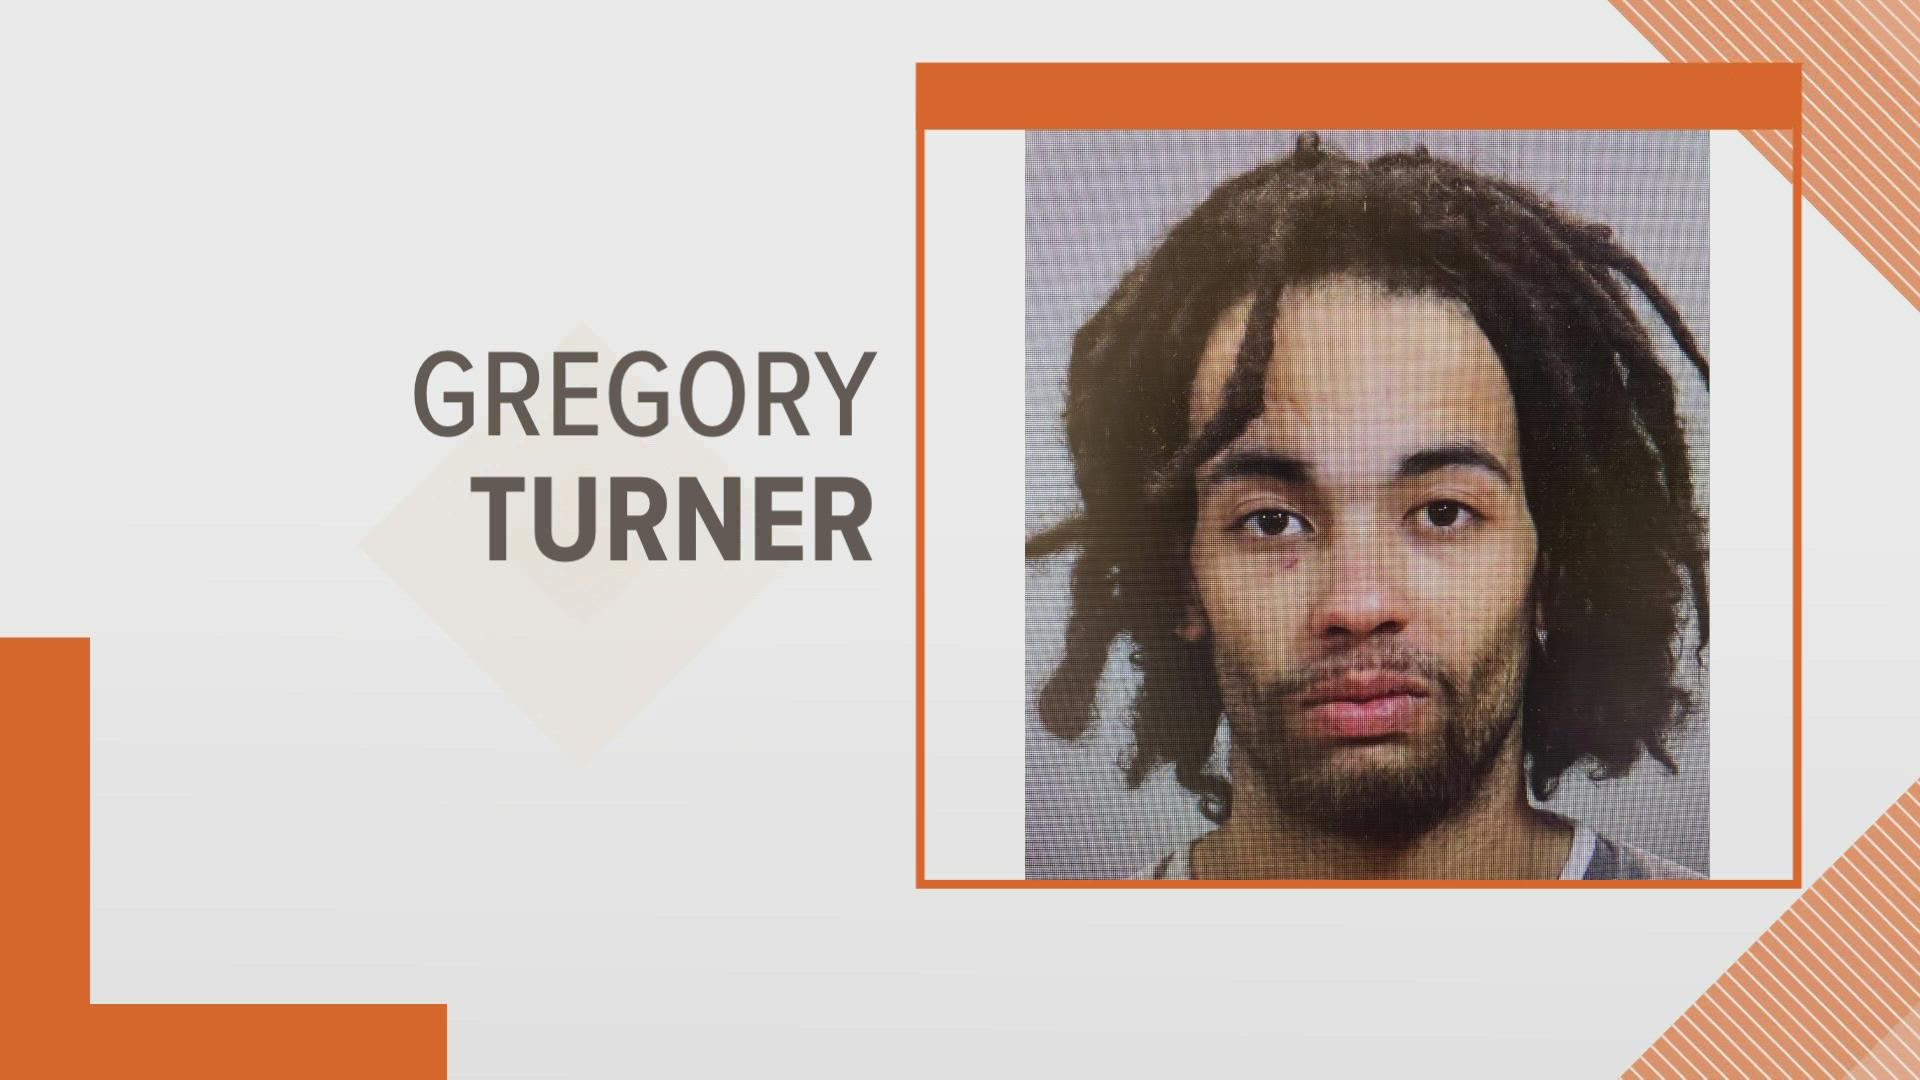 Gregory Turner is wanted on outstanding warrants for an incident that occurred in June 2022.